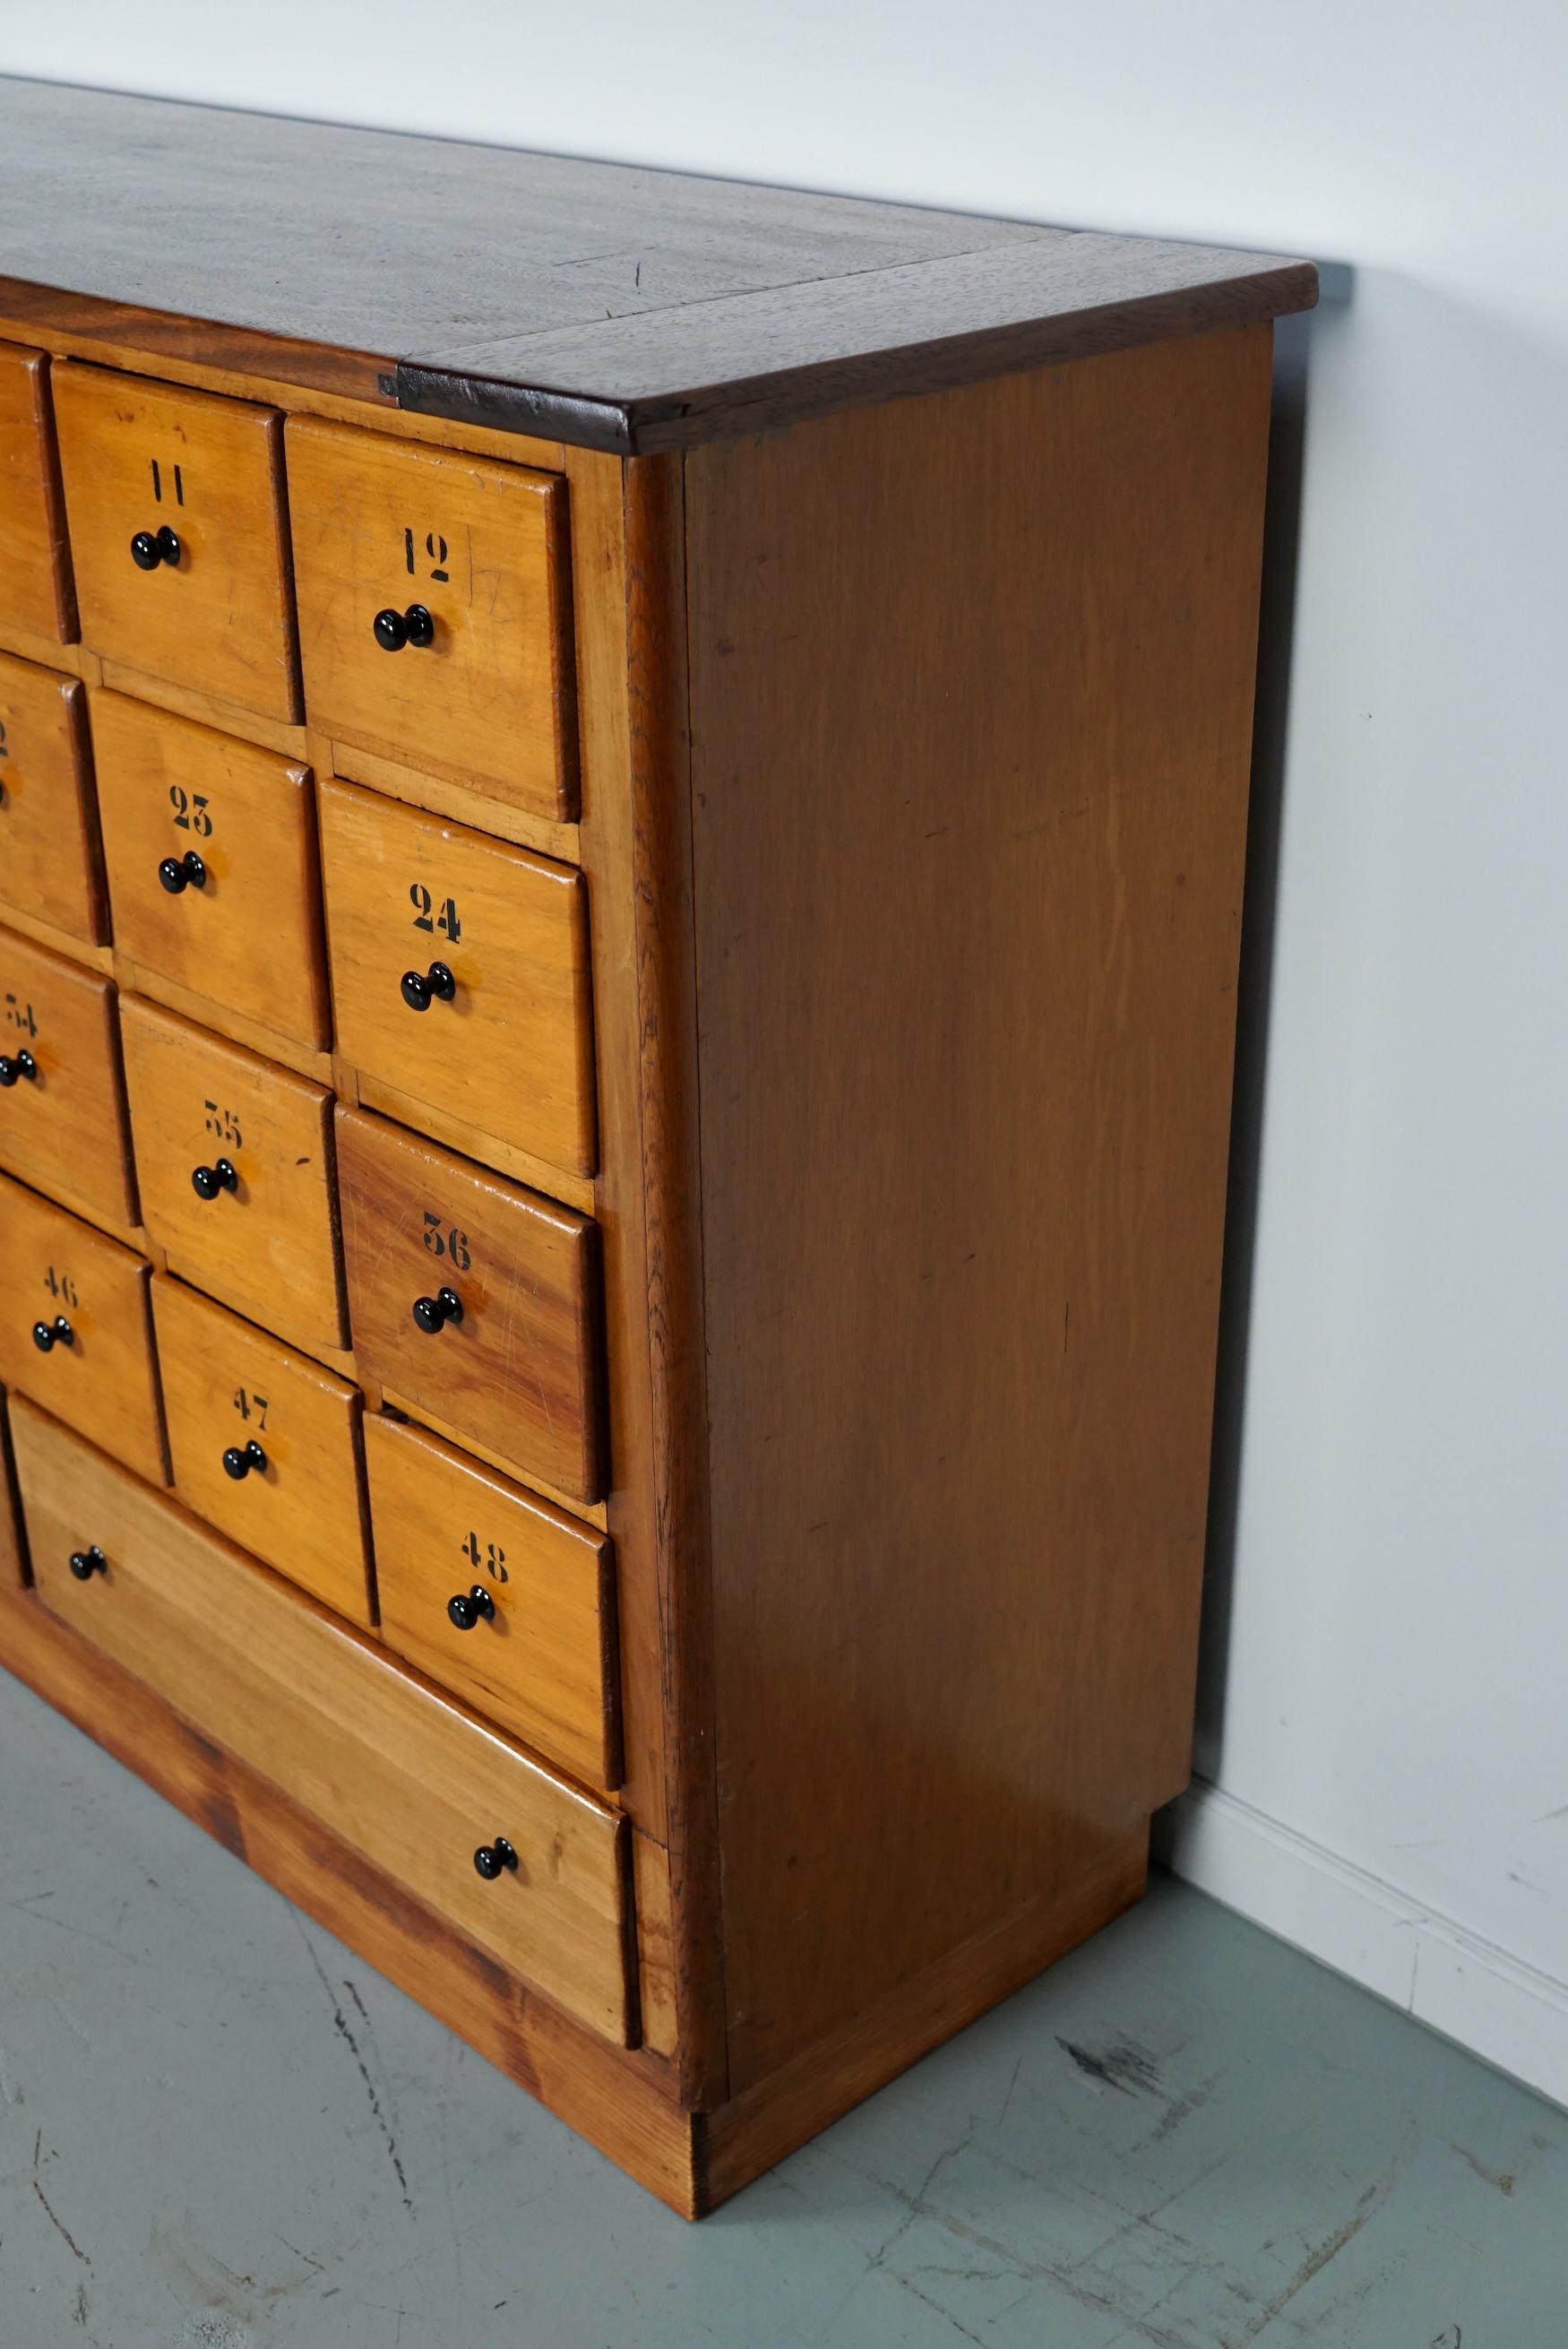 Large Dutch Industrial Beech Apothecary / School Cabinet, Mid-20th Century For Sale 10